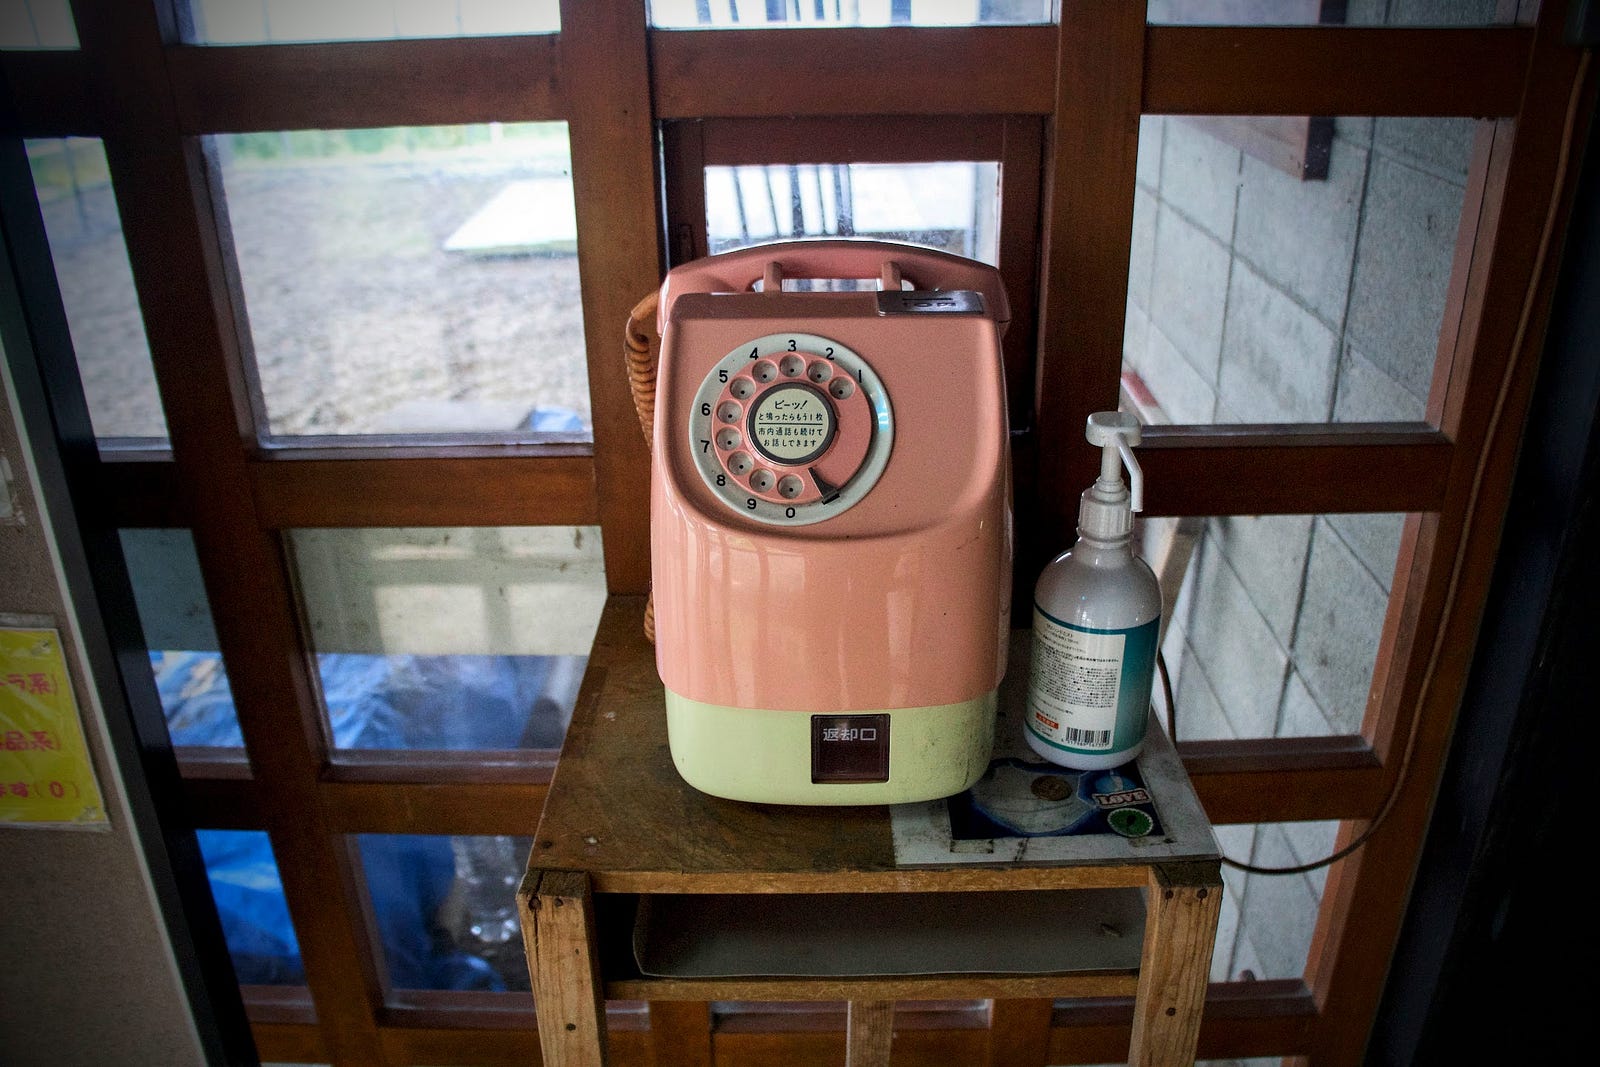 A pink and white phone sits in the corridor of Hayama Shimin-so